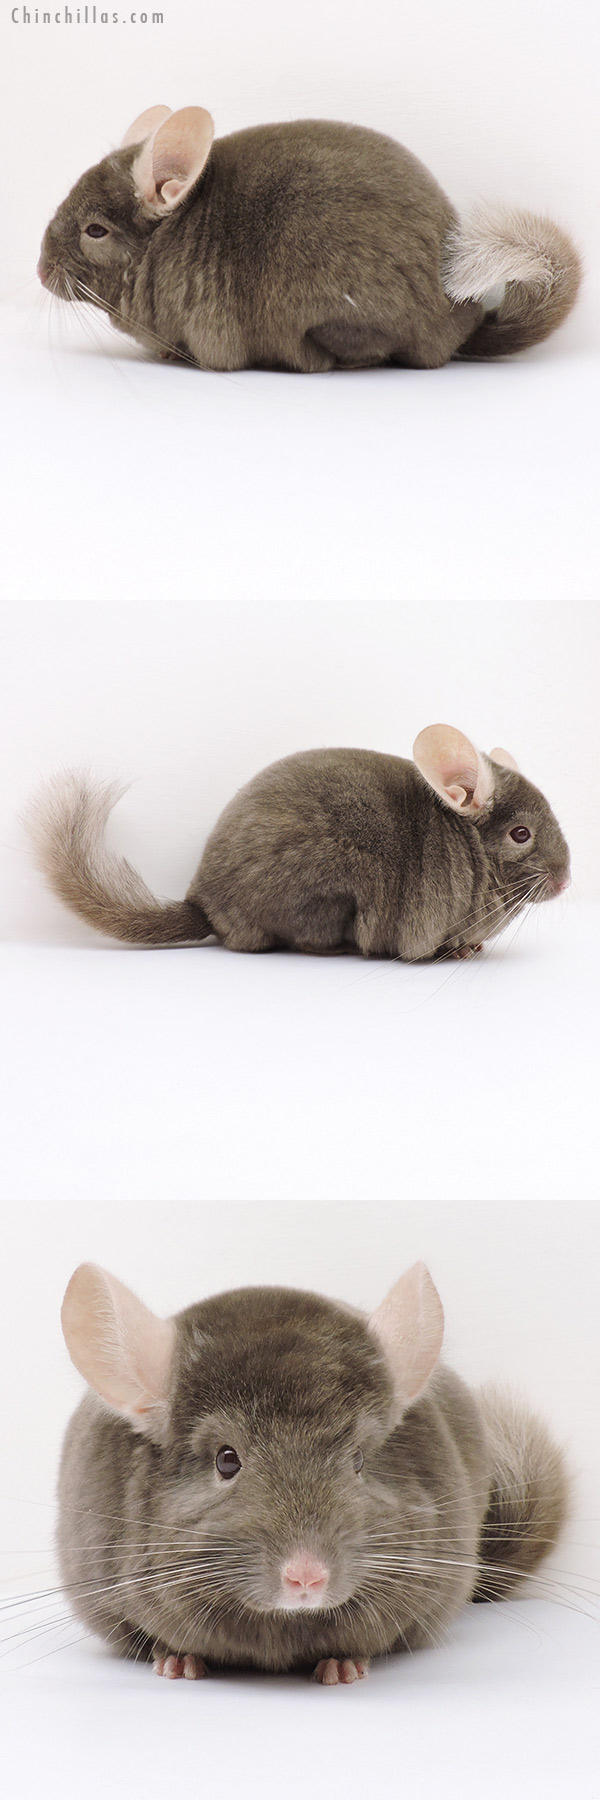 Chinchilla or related item offered for sale or export on Chinchillas.com - 16273 Top Show Quality Tan Male Chinchilla